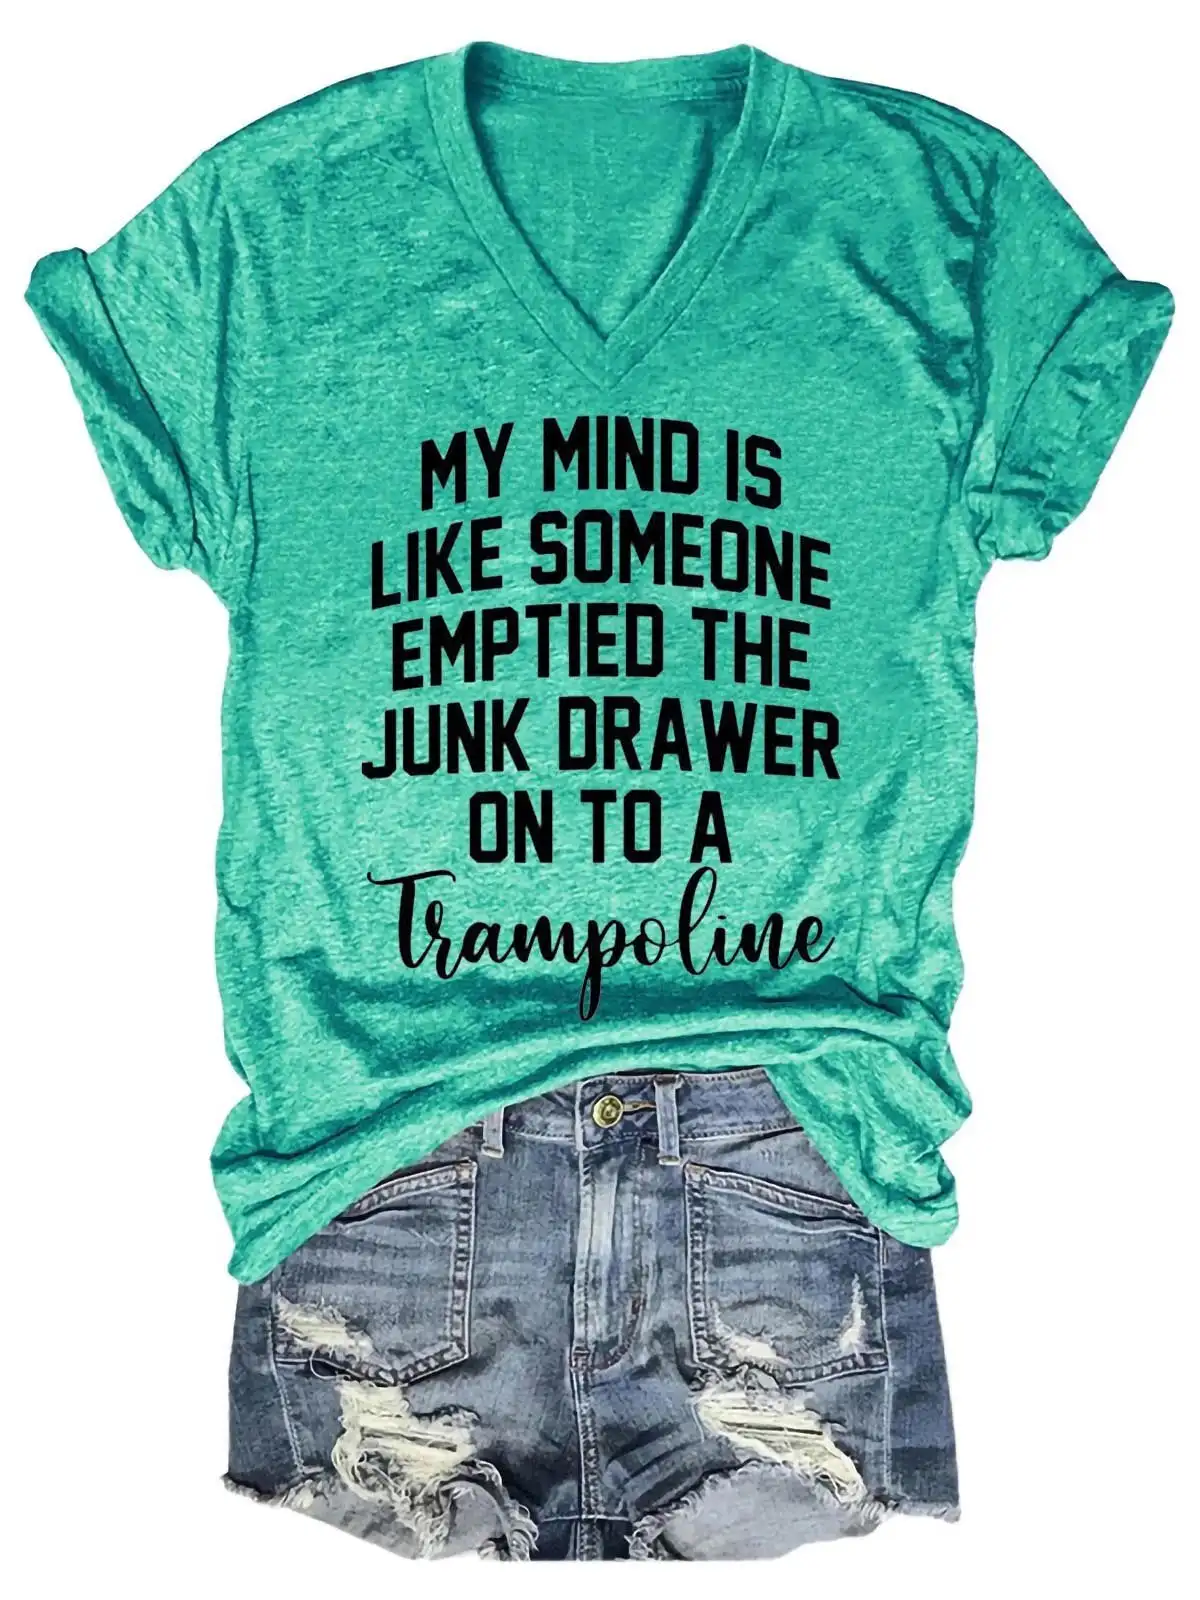 Lovessales Women's My Mind Is Like Someone Emptied The Junk Drawer On To A Trampoline V-Neck 100% Cotton T-shirt